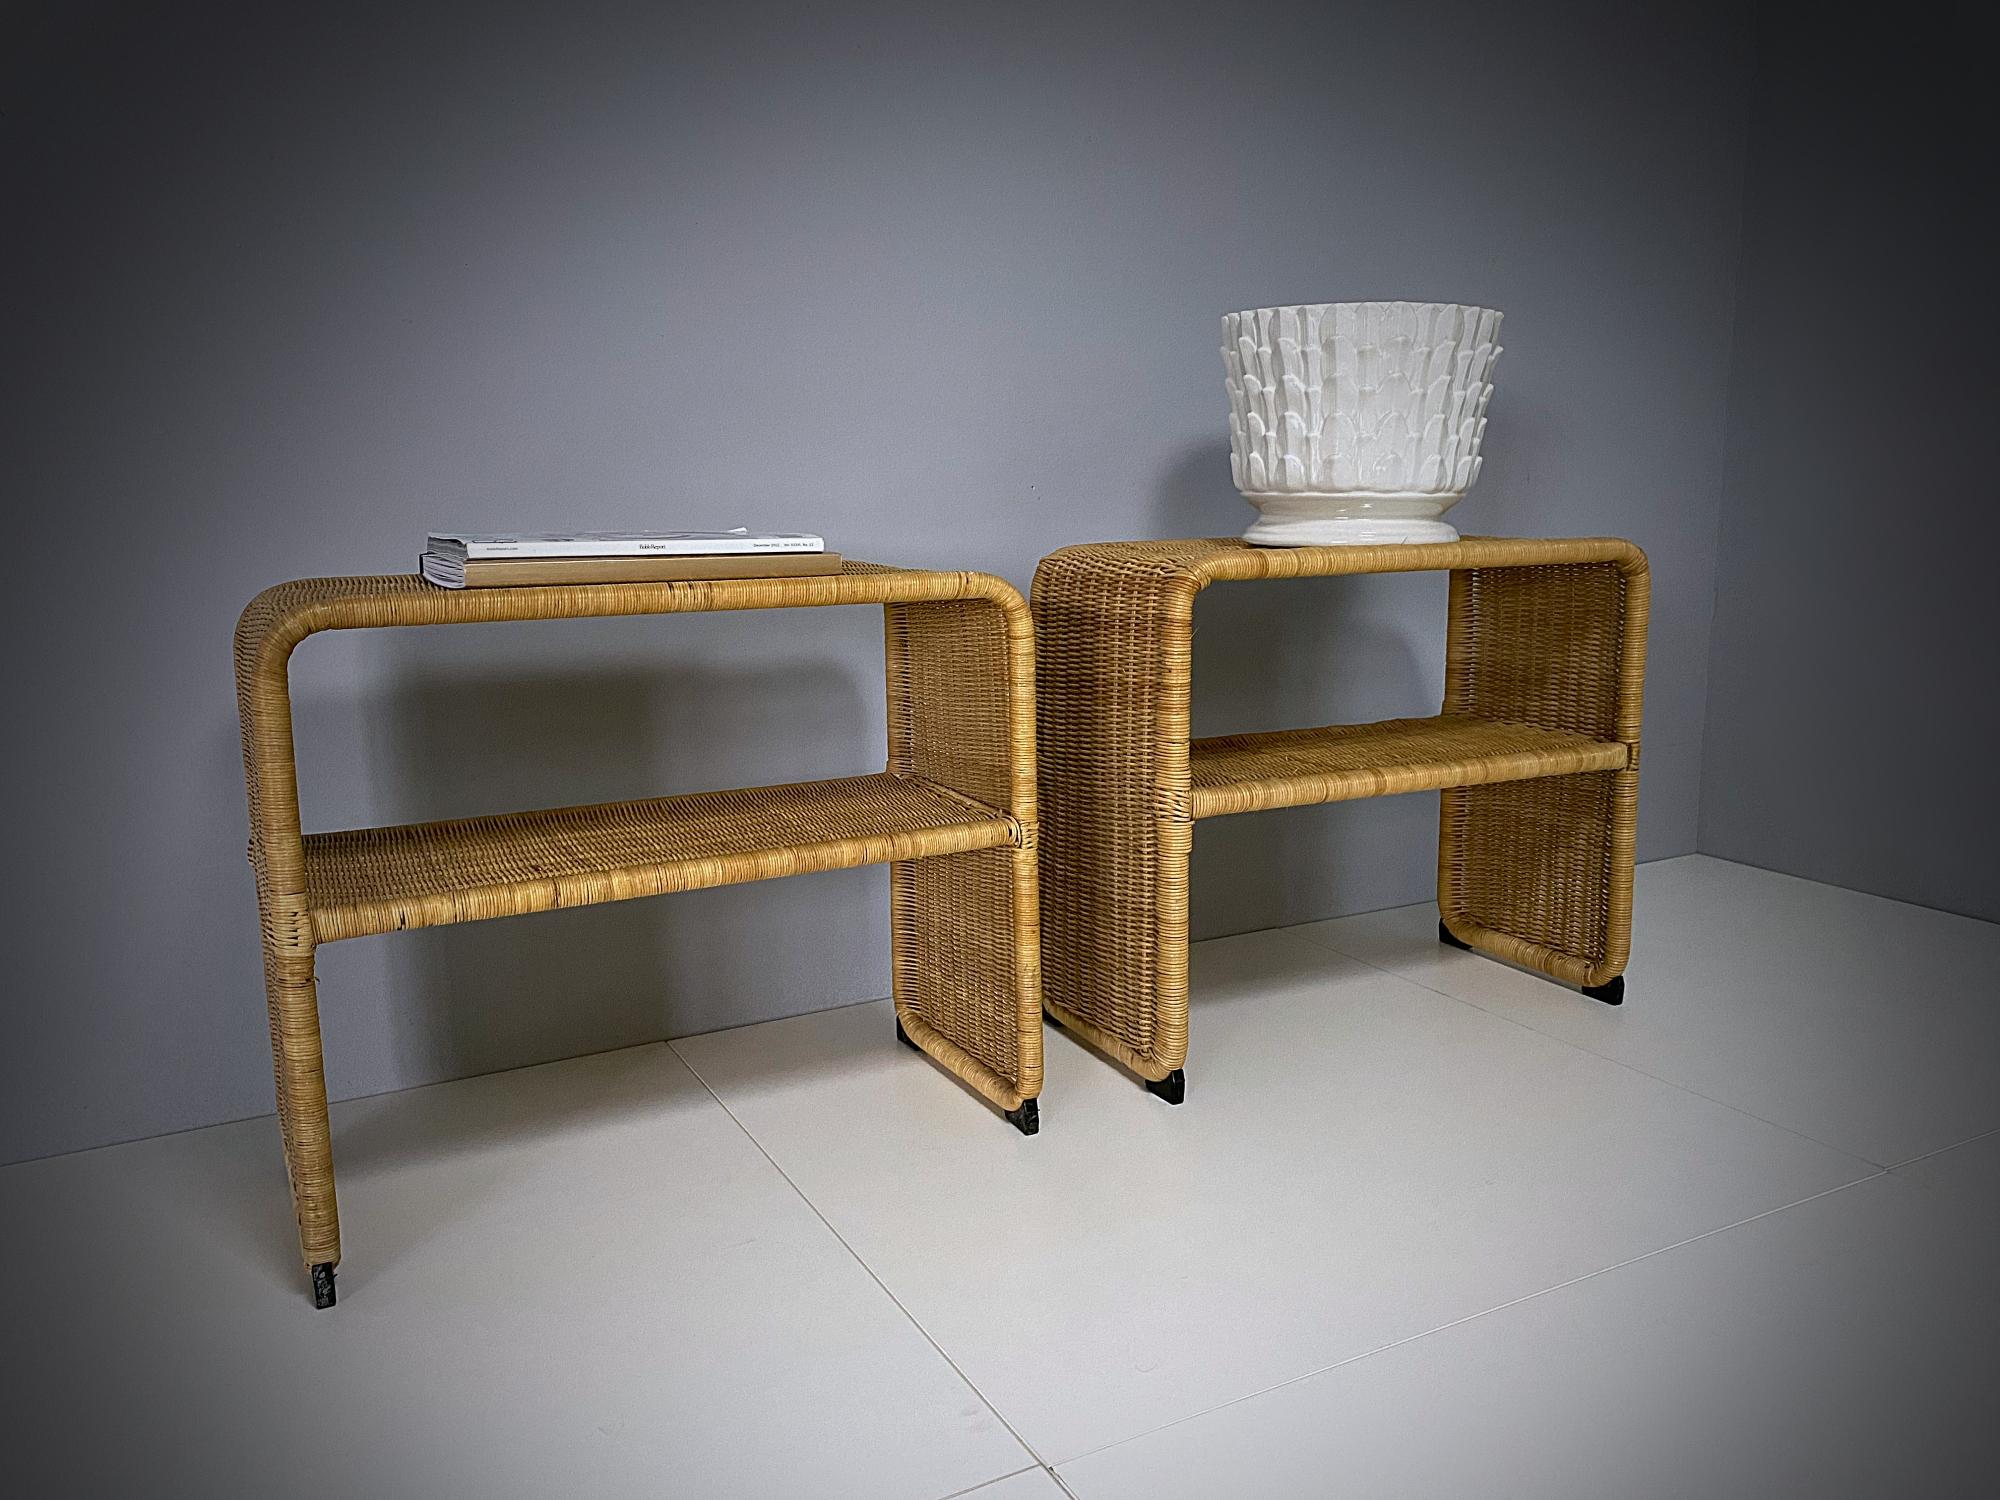 Metalwork Tito Agnoli Style Rattan Nightstands, Coffee and Side Tables, 1970s, Sweden